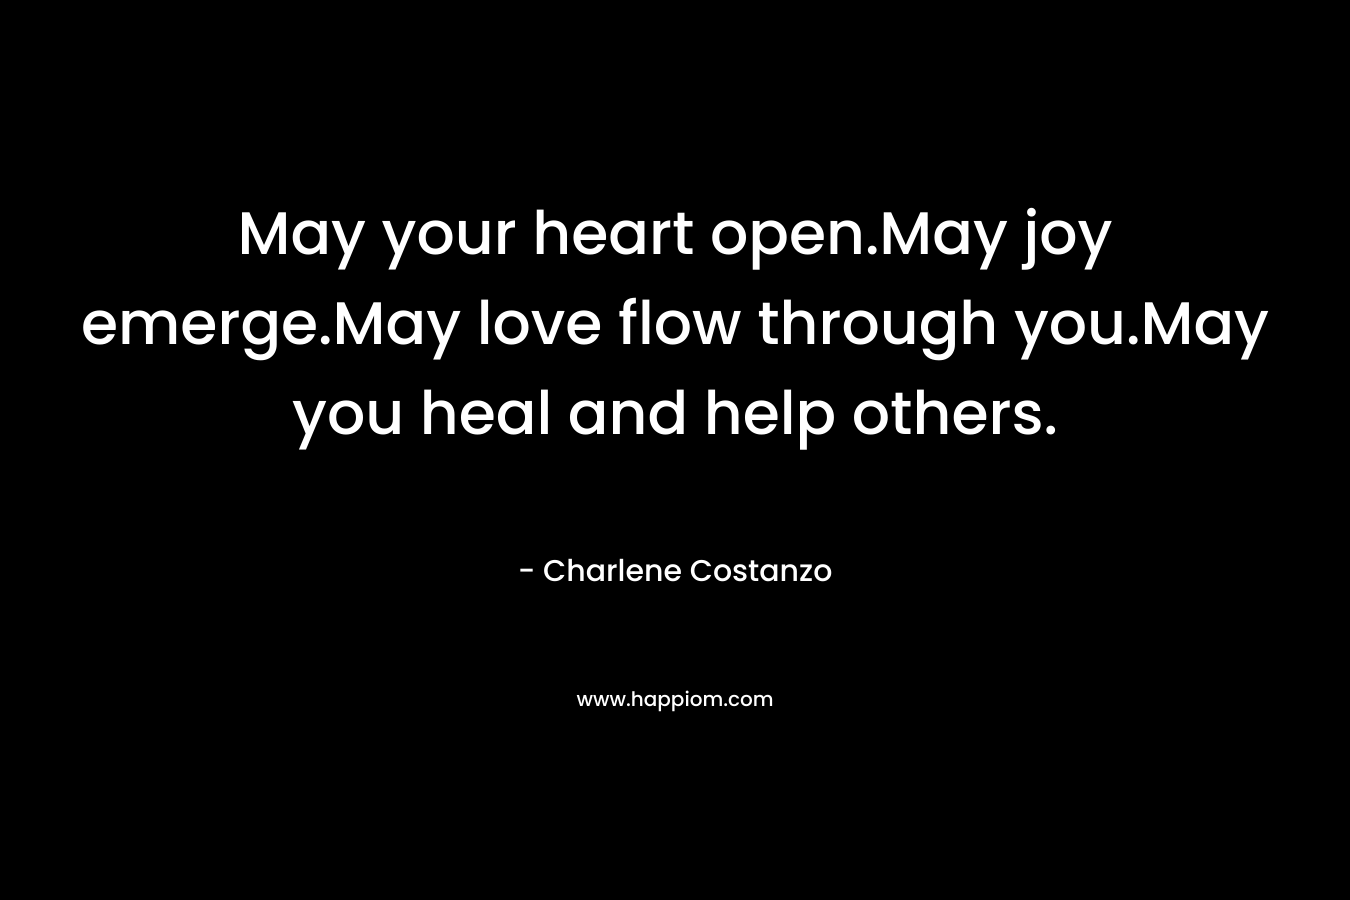 May your heart open.May joy emerge.May love flow through you.May you heal and help others.